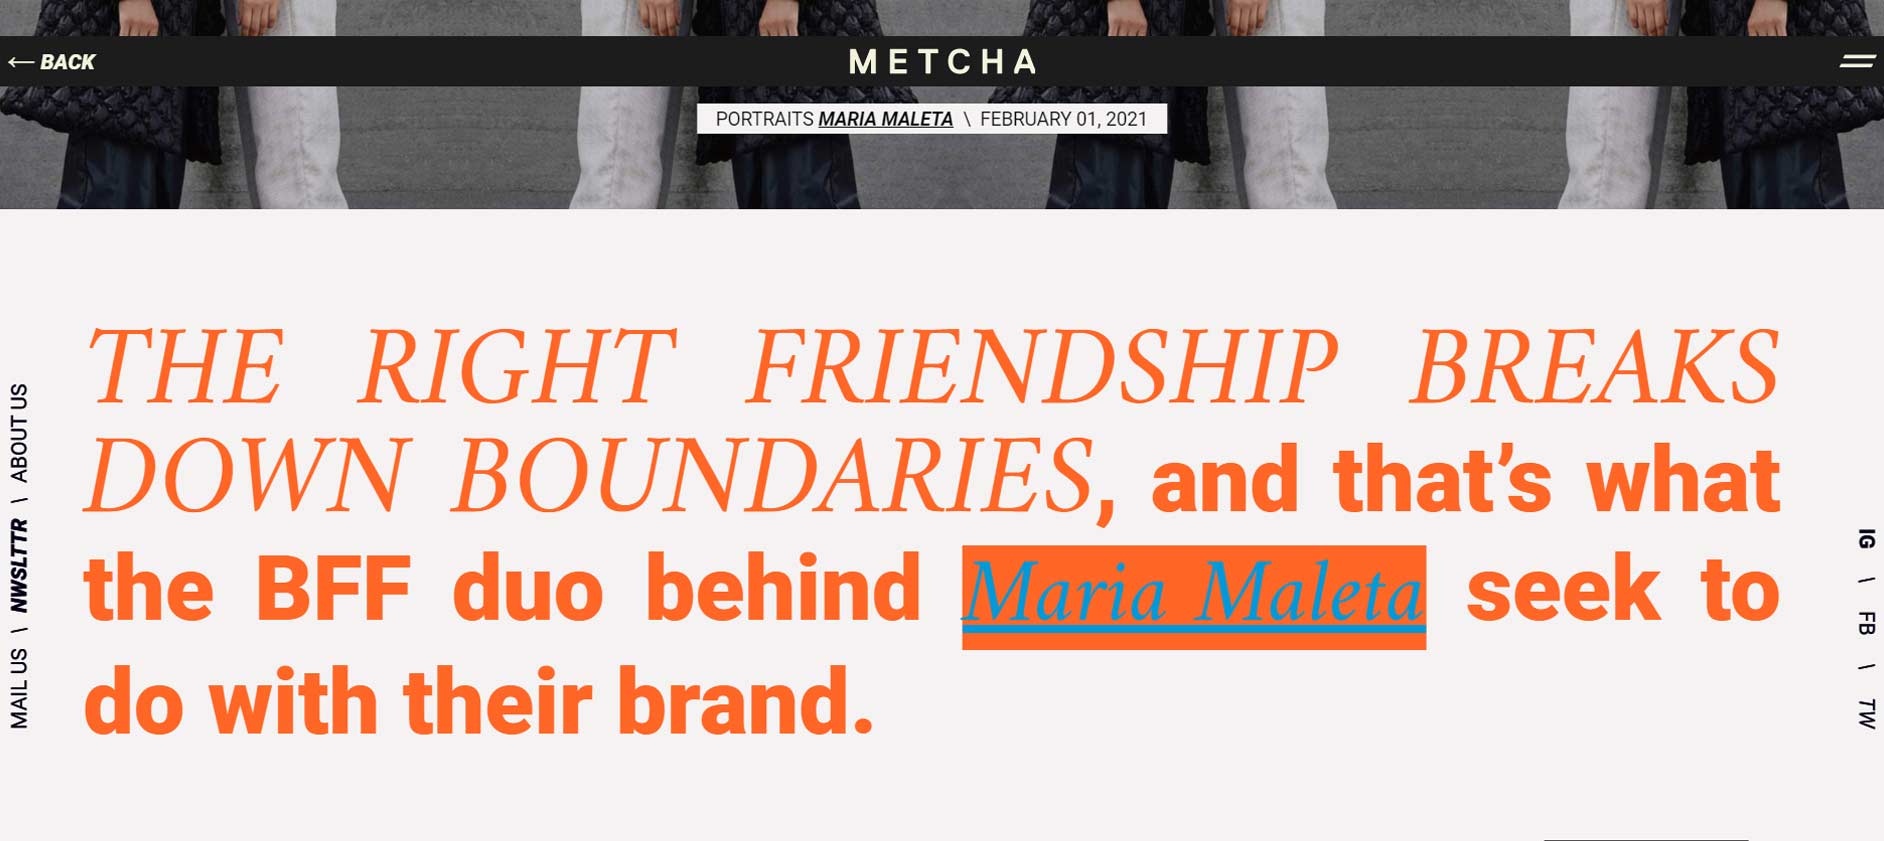 metcha-article-bags-brand-friendship2